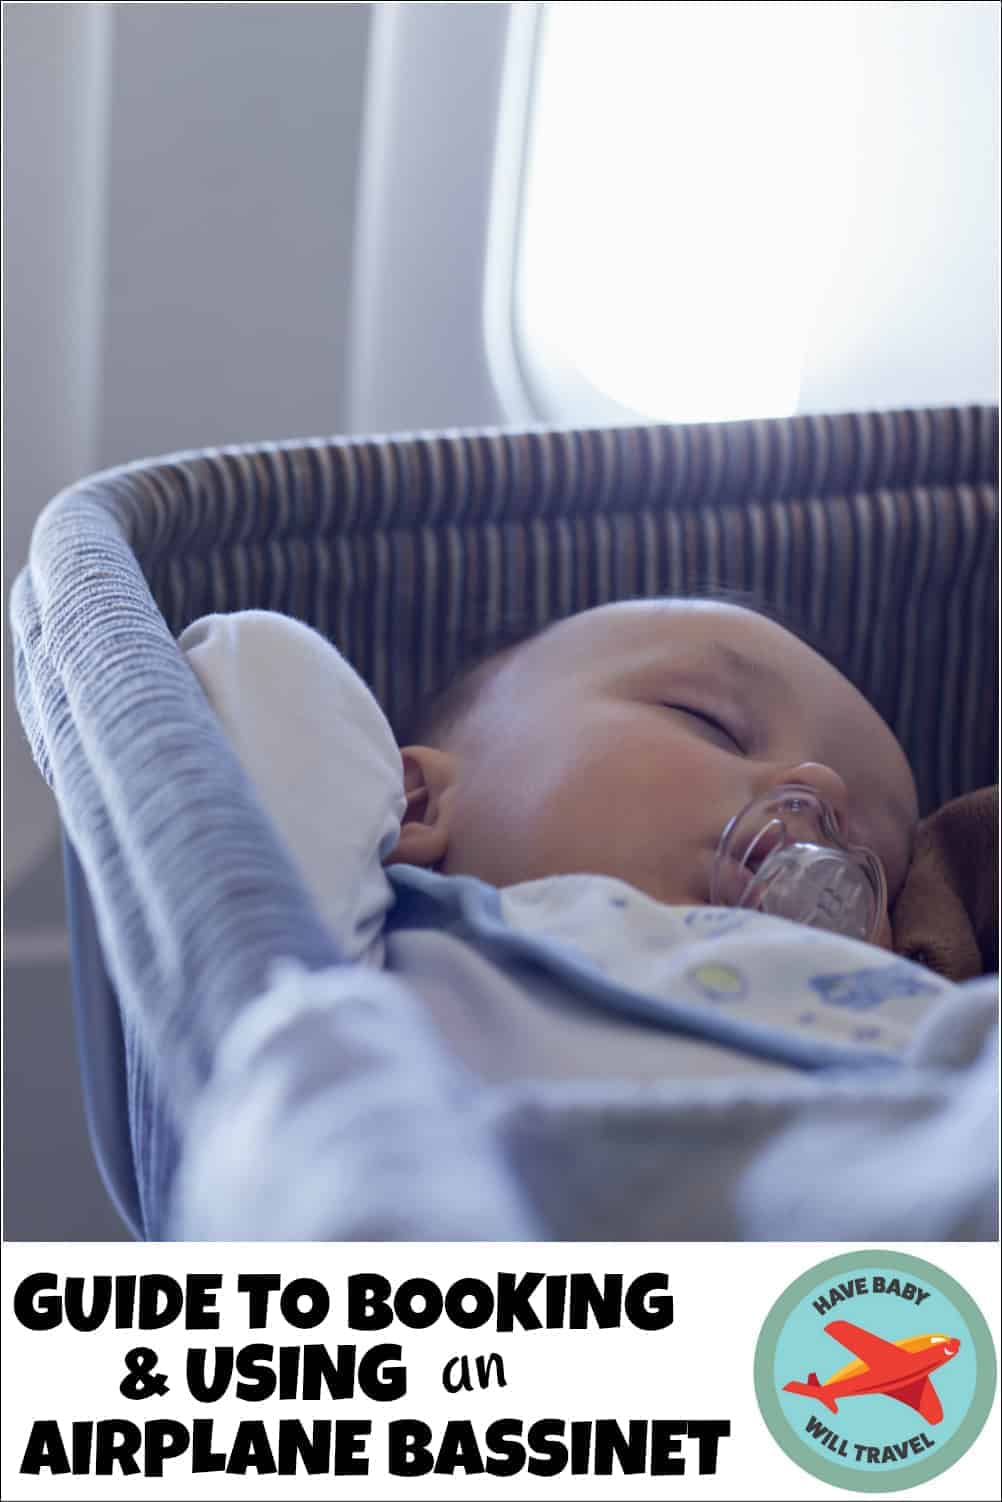 sur tilbagebetaling Isolere Guide to Booking & Using an Airplane Bassinet | Have Baby Will Travel